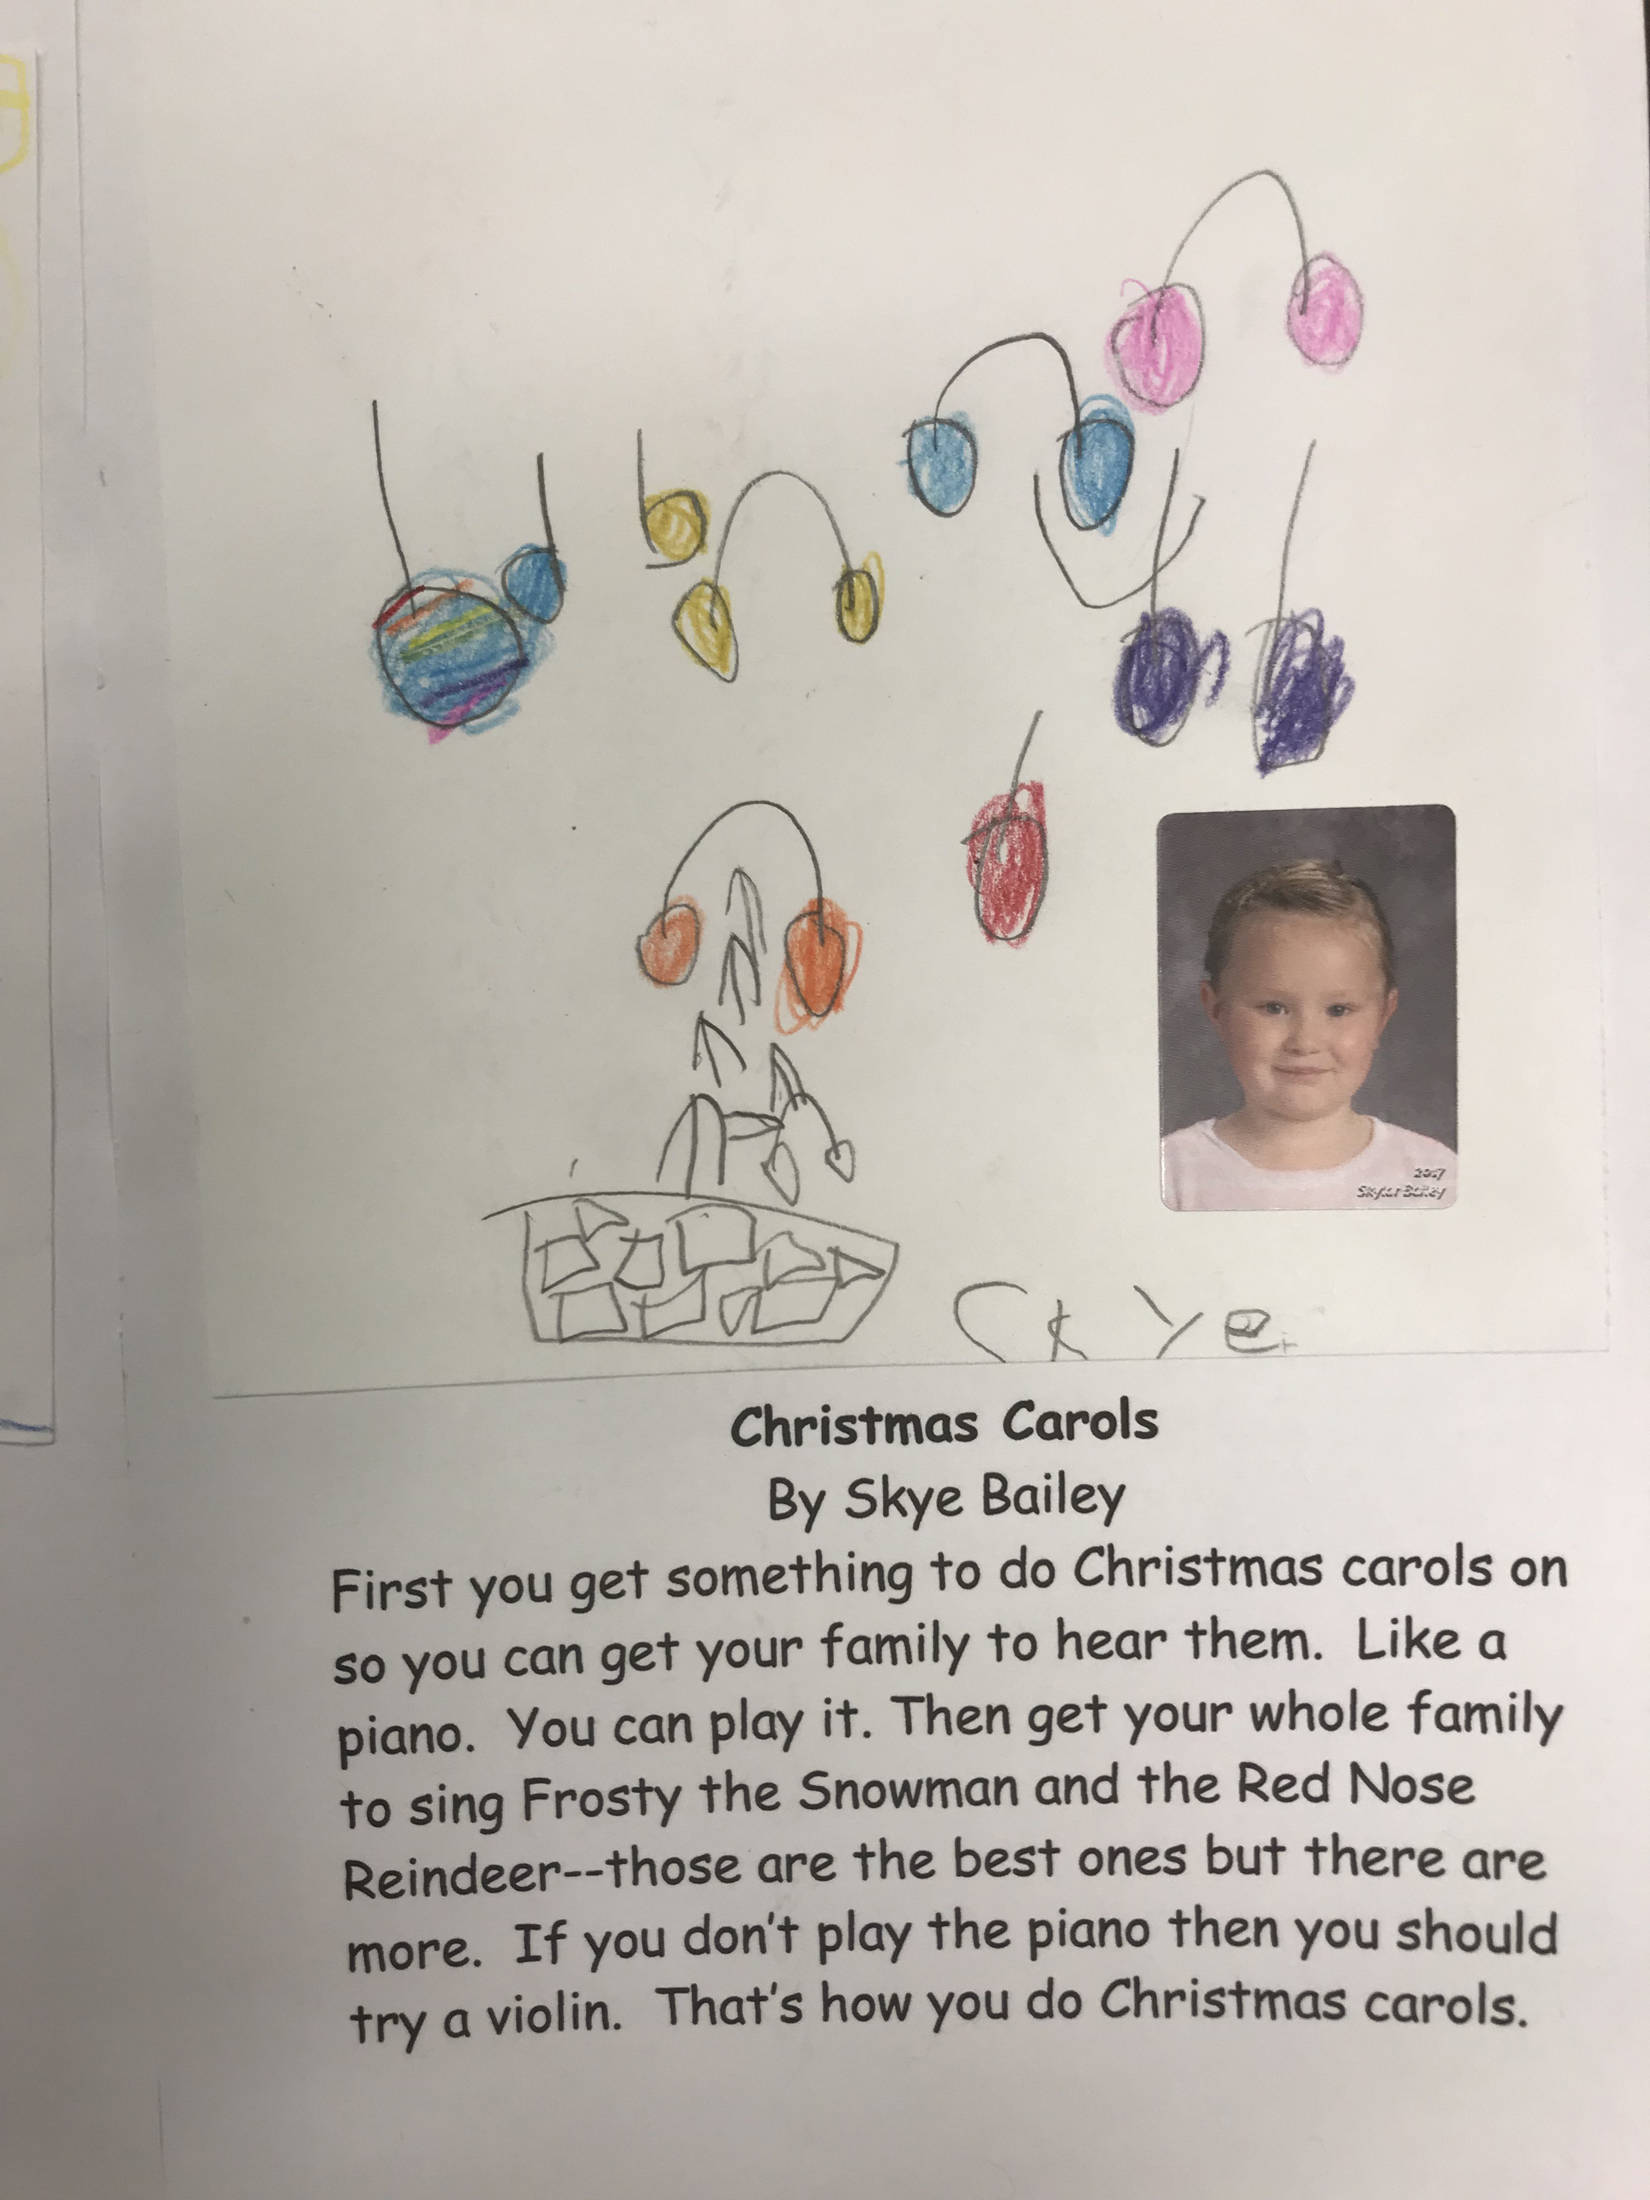 This holiday instruction made by Skye Bailey is part of an 18-page “How to Get Ready for the Holidays” book created by the students of Jennifer Reinhart’s kindergarten class. (Photo courtesy Jennifer Reinhart)